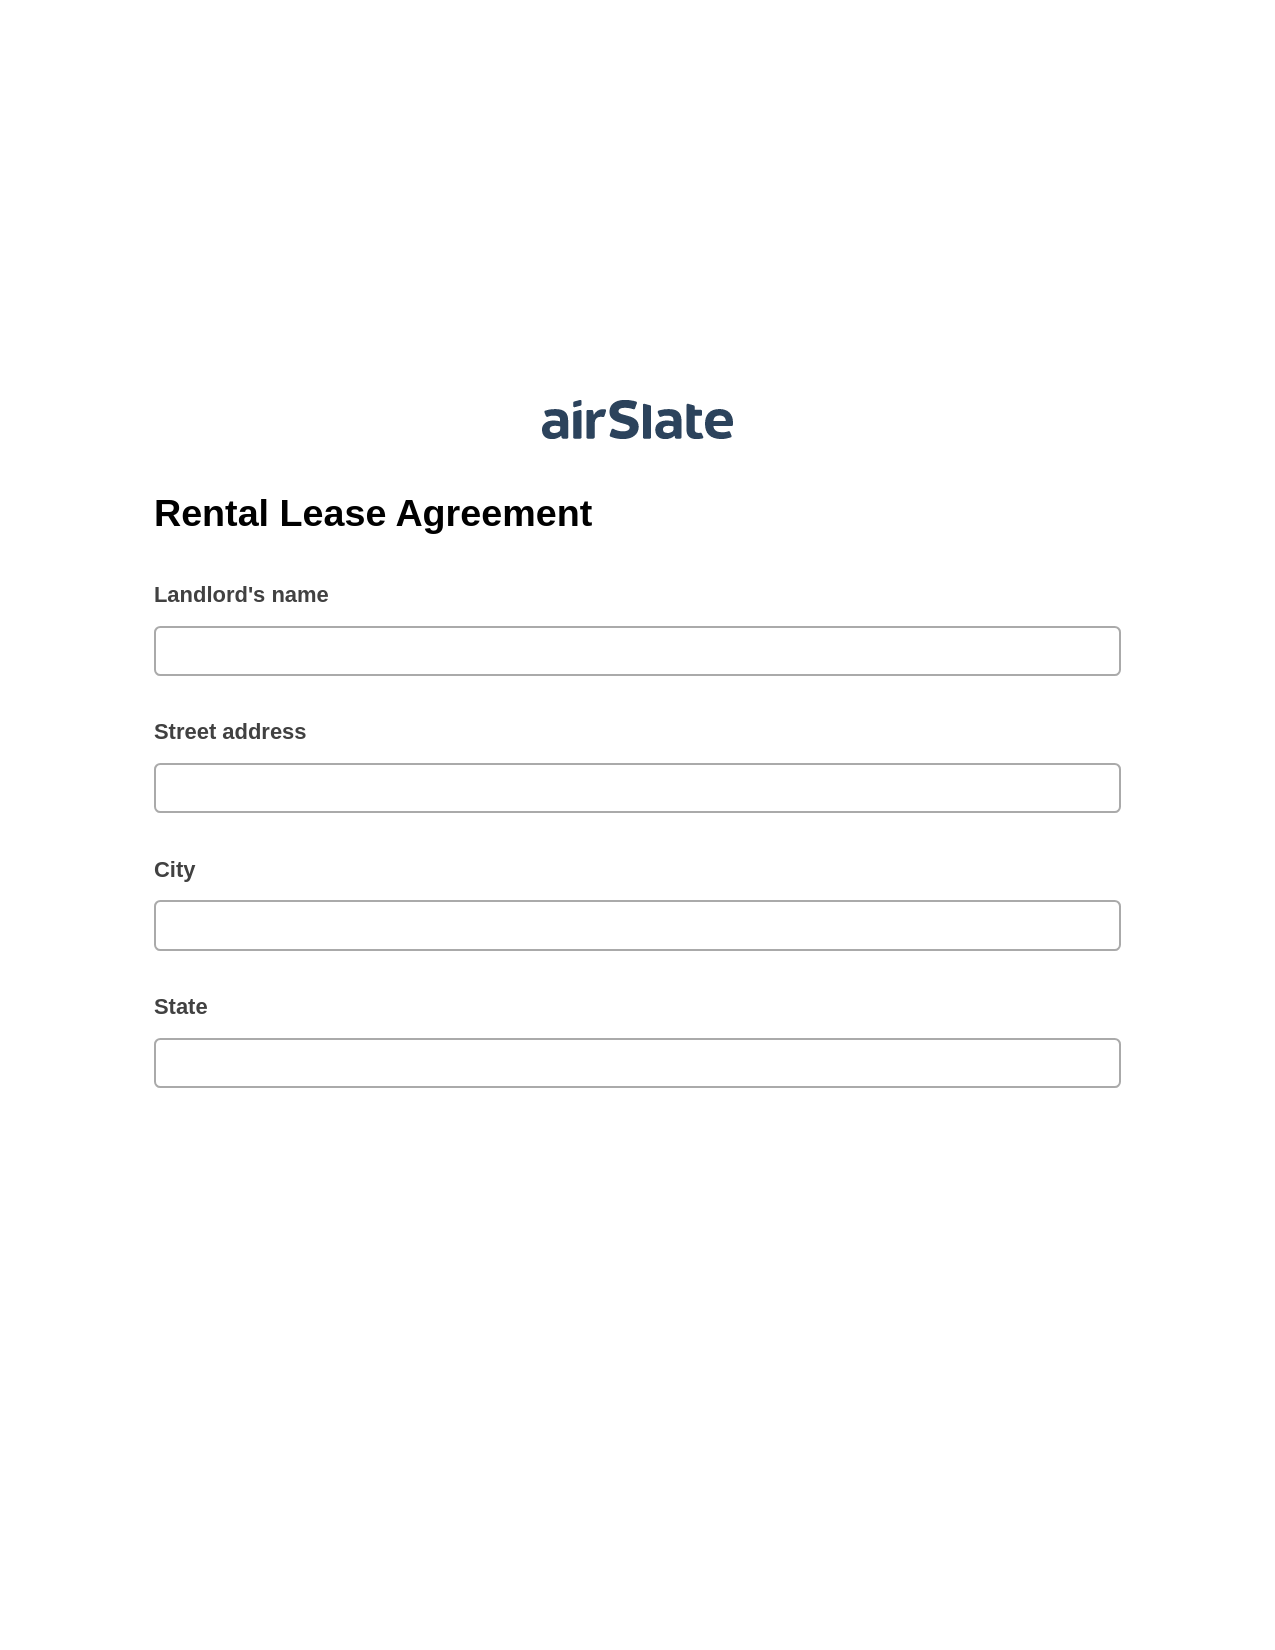 Rental Lease Agreement Pre-fill from Google Sheets Bot, Update NetSuite Records Bot, Export to Google Sheet Bot